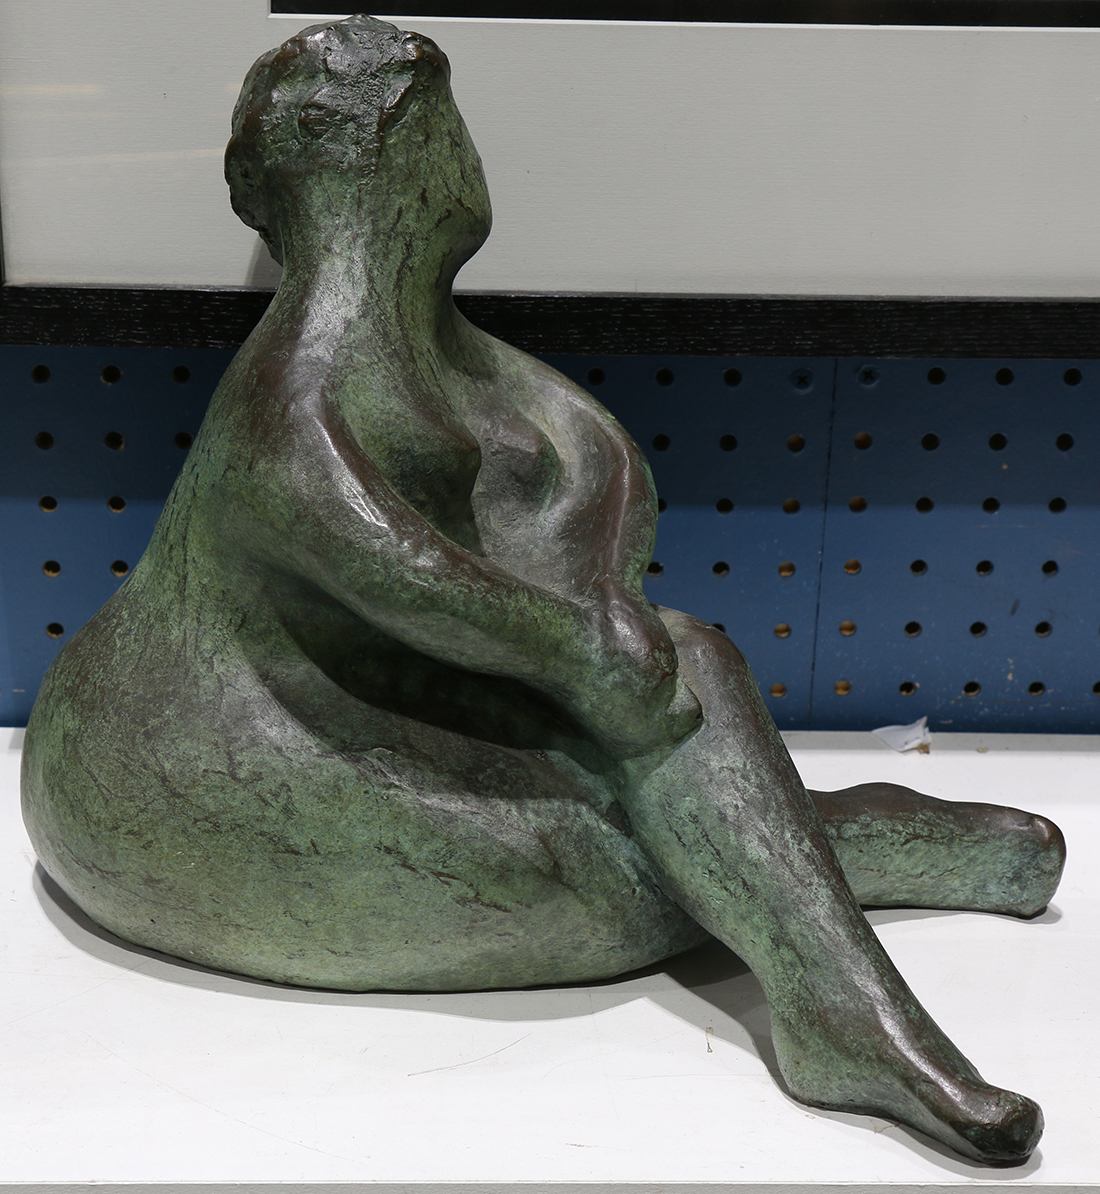 Carol Standerfer (American, 20th century), Seated Nude, bronze sculpture, unsigned, overall: 11.25"h - Image 2 of 2